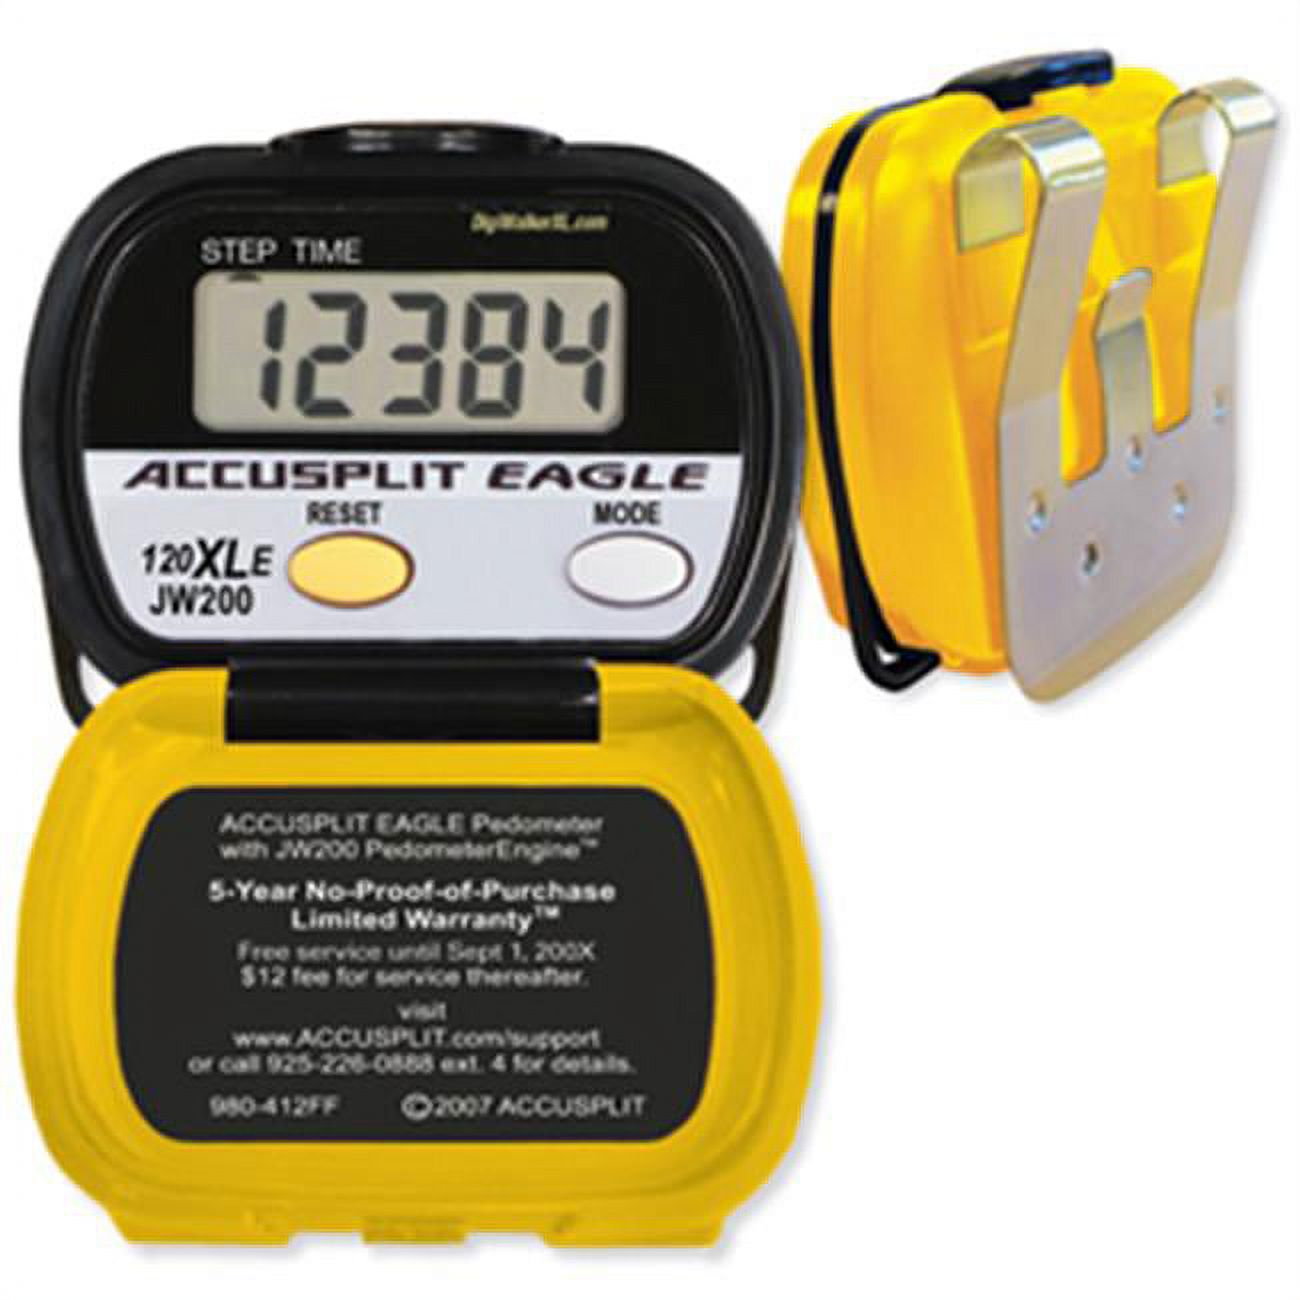 Accusplit AE120XLE-XBX Step Pedometer with Auto Activity Timer - image 1 of 2